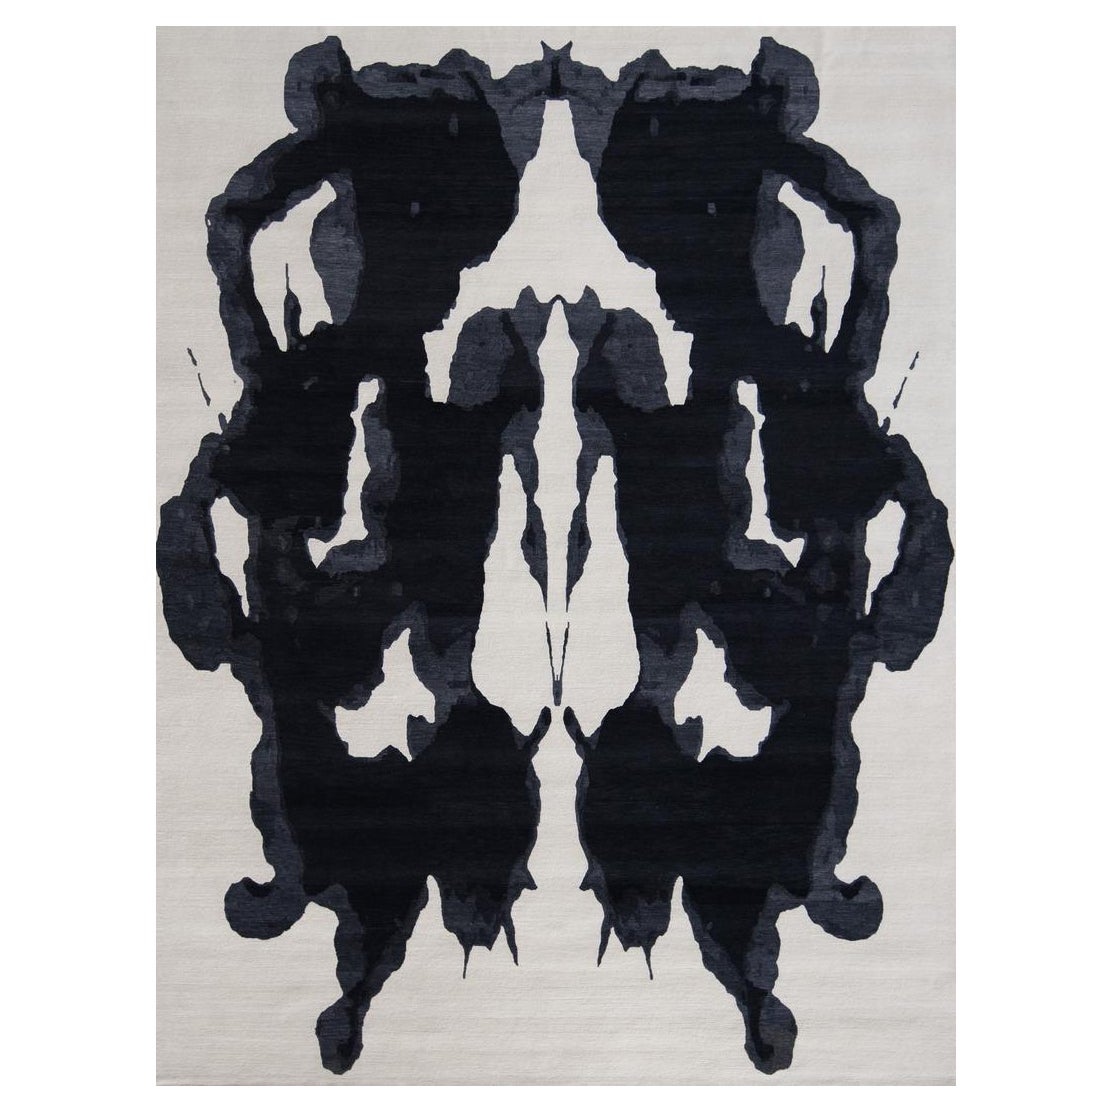 "Inkblot #1 - Black & White" /  8' x 10' / Hand-Knotted Wool Rug